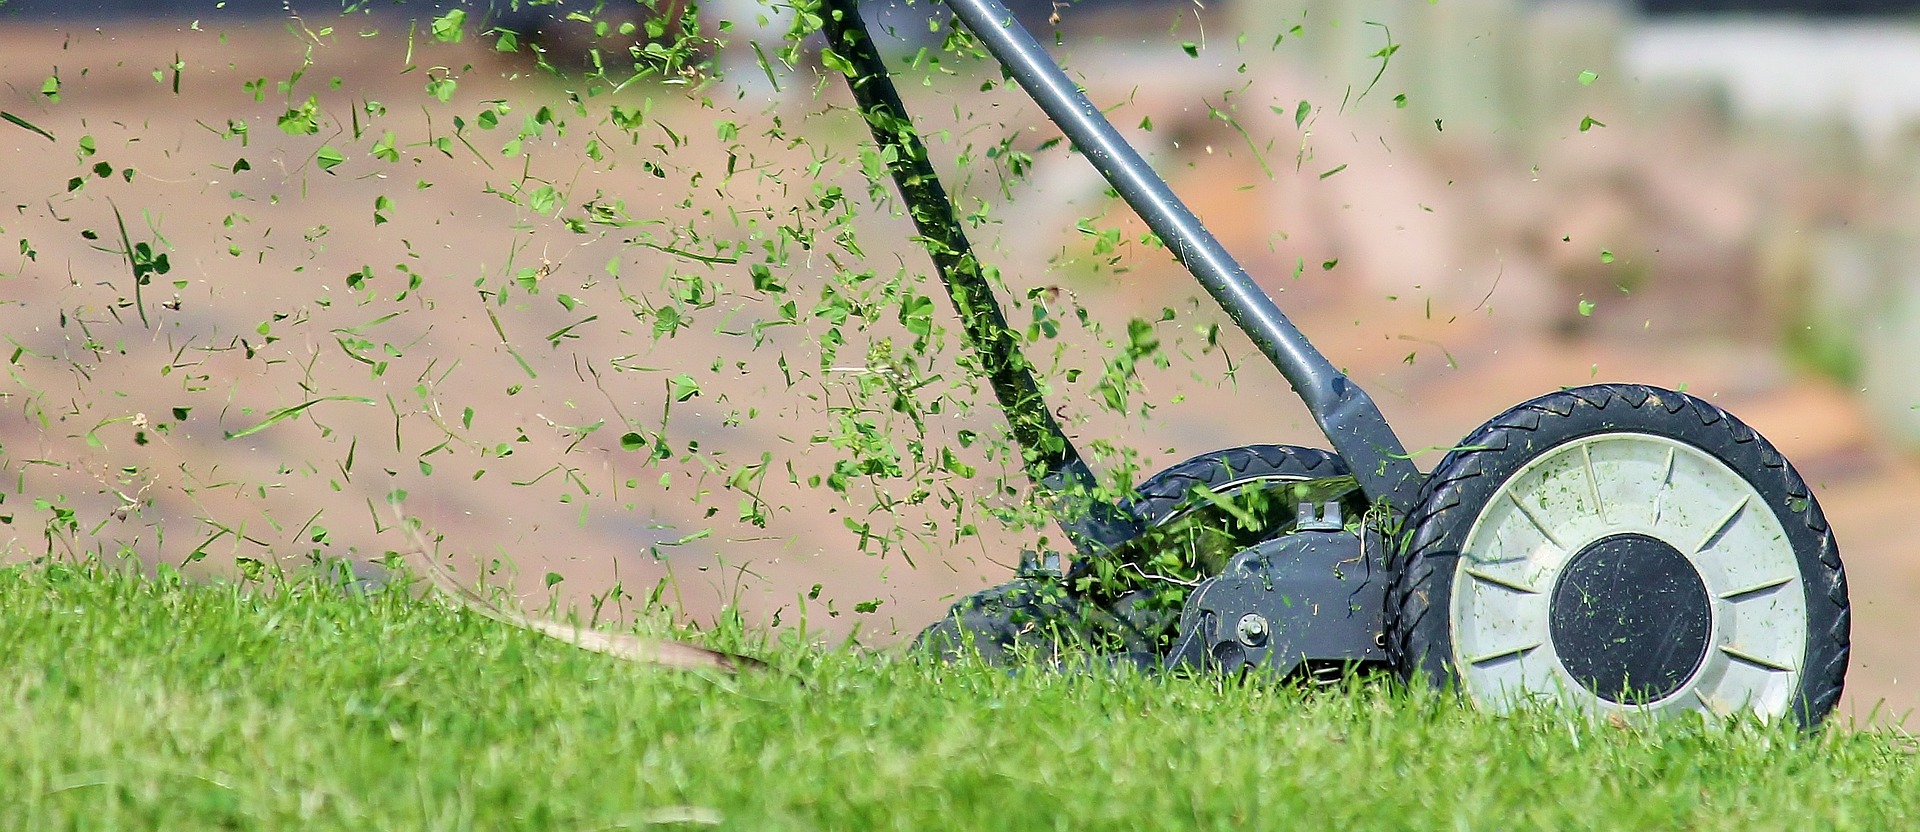 Tips for Lawn Care in Spring